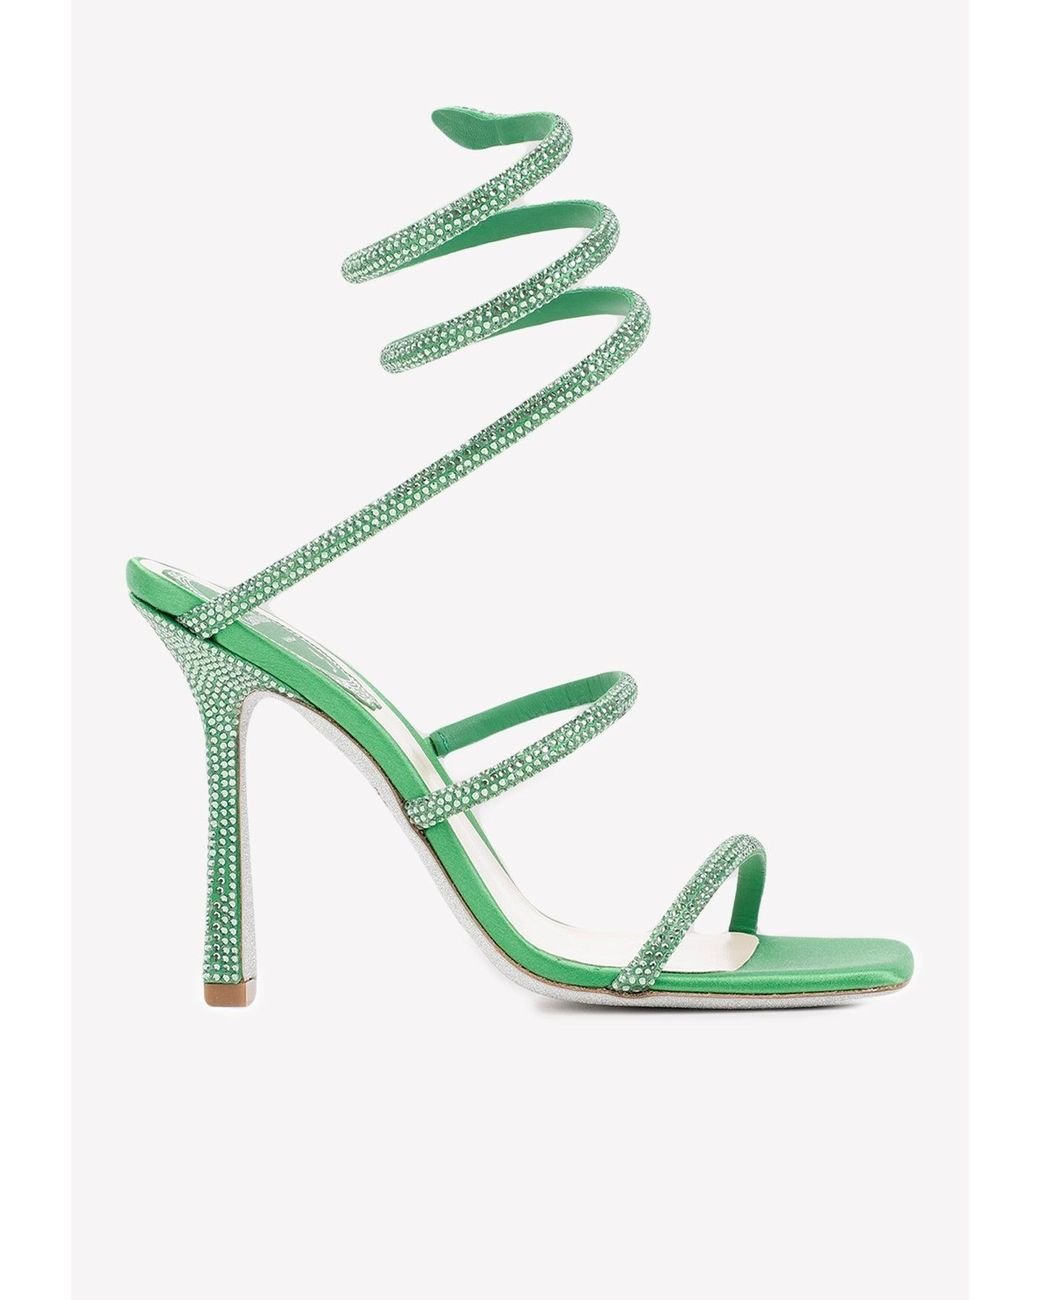 Rene Caovilla Cleo 105 Crystal-embellished Sandals in Green | Lyst